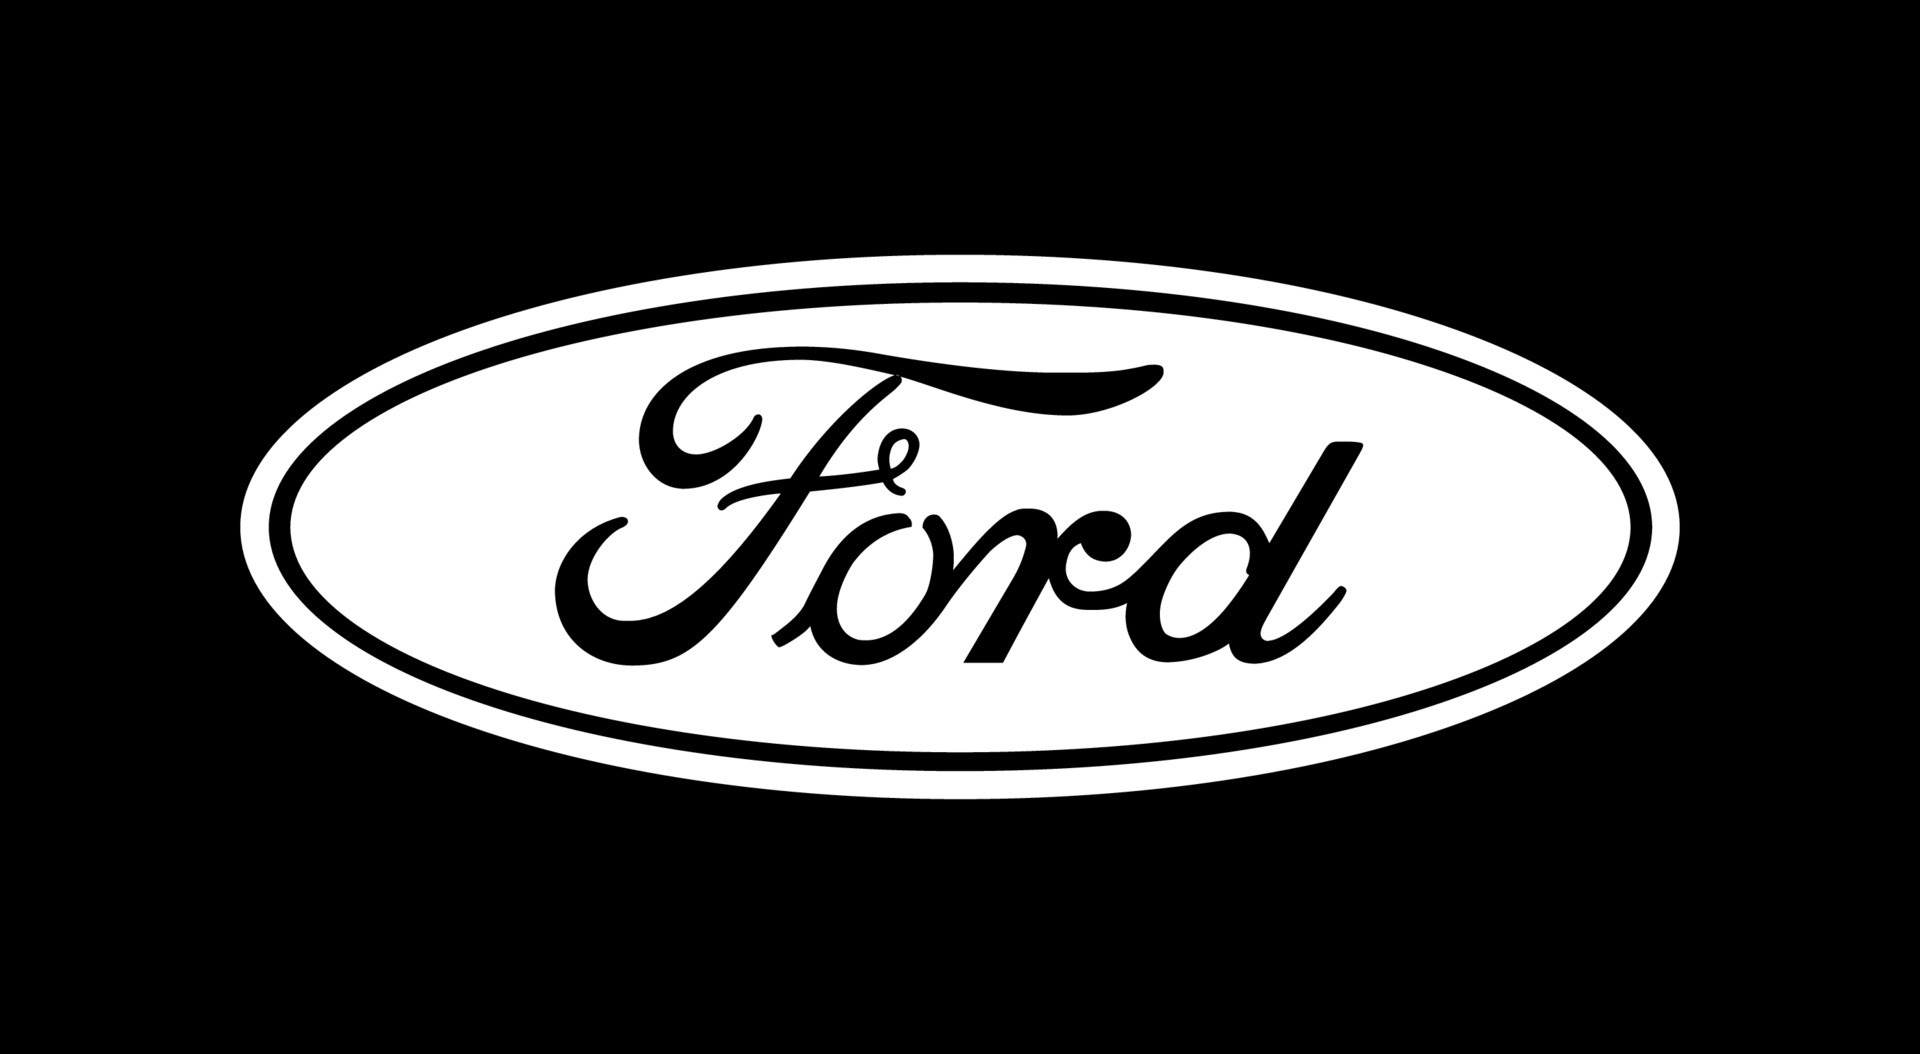 https://static.vecteezy.com/system/resources/previews/020/336/454/original/ford-logo-ford-icon-free-free-vector.jpg